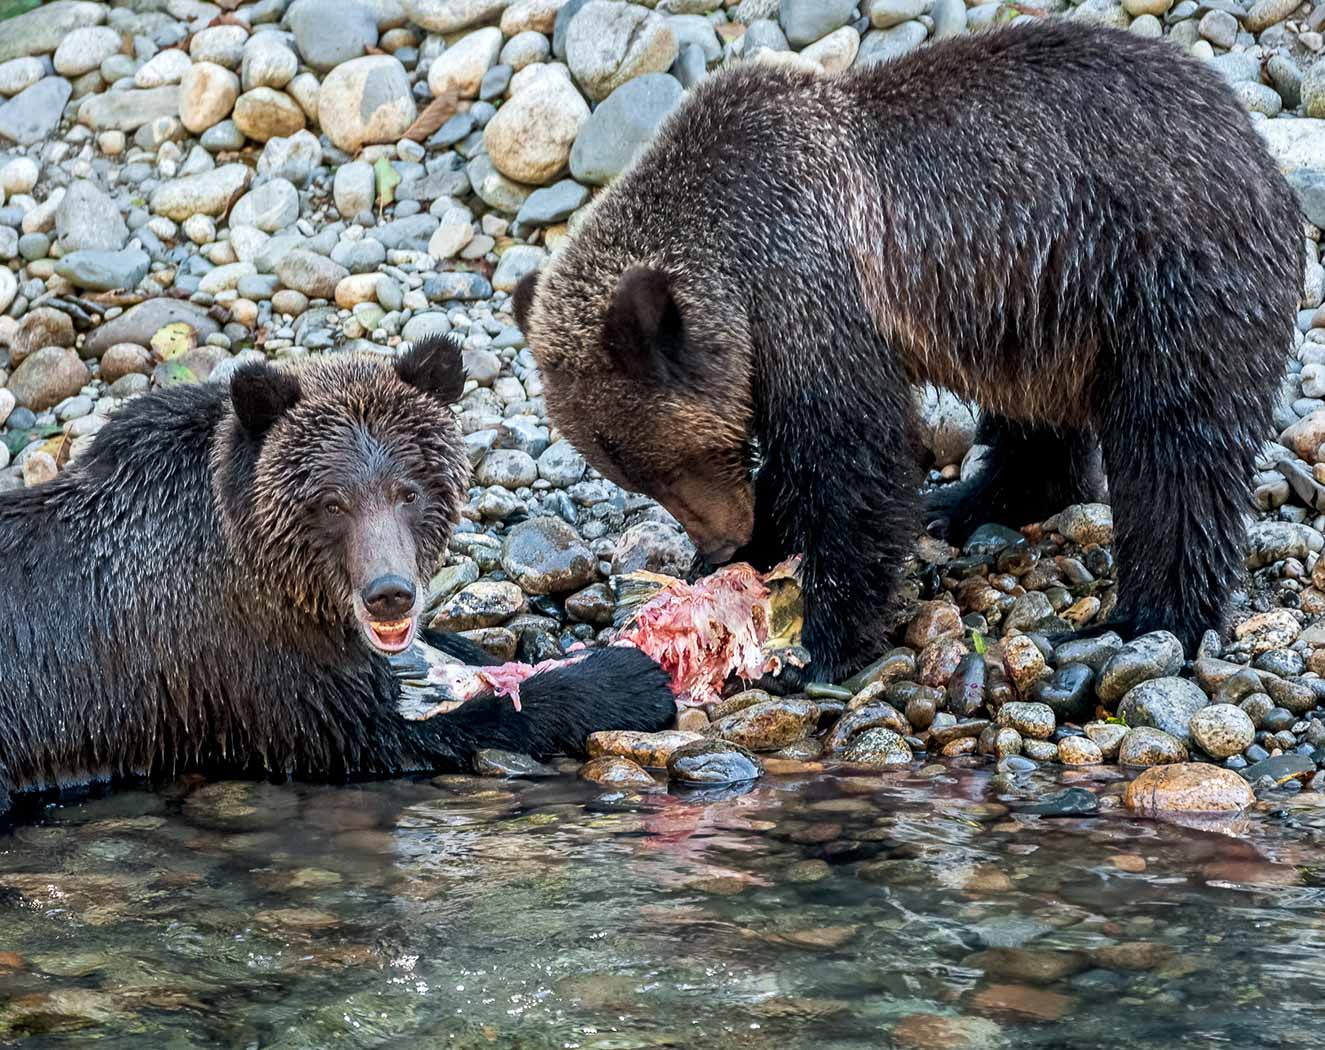 Grizzly Cubs Share the Catch<br>Rachel Penney<br>Celebration of Nature 2015<br>Points: 22.3